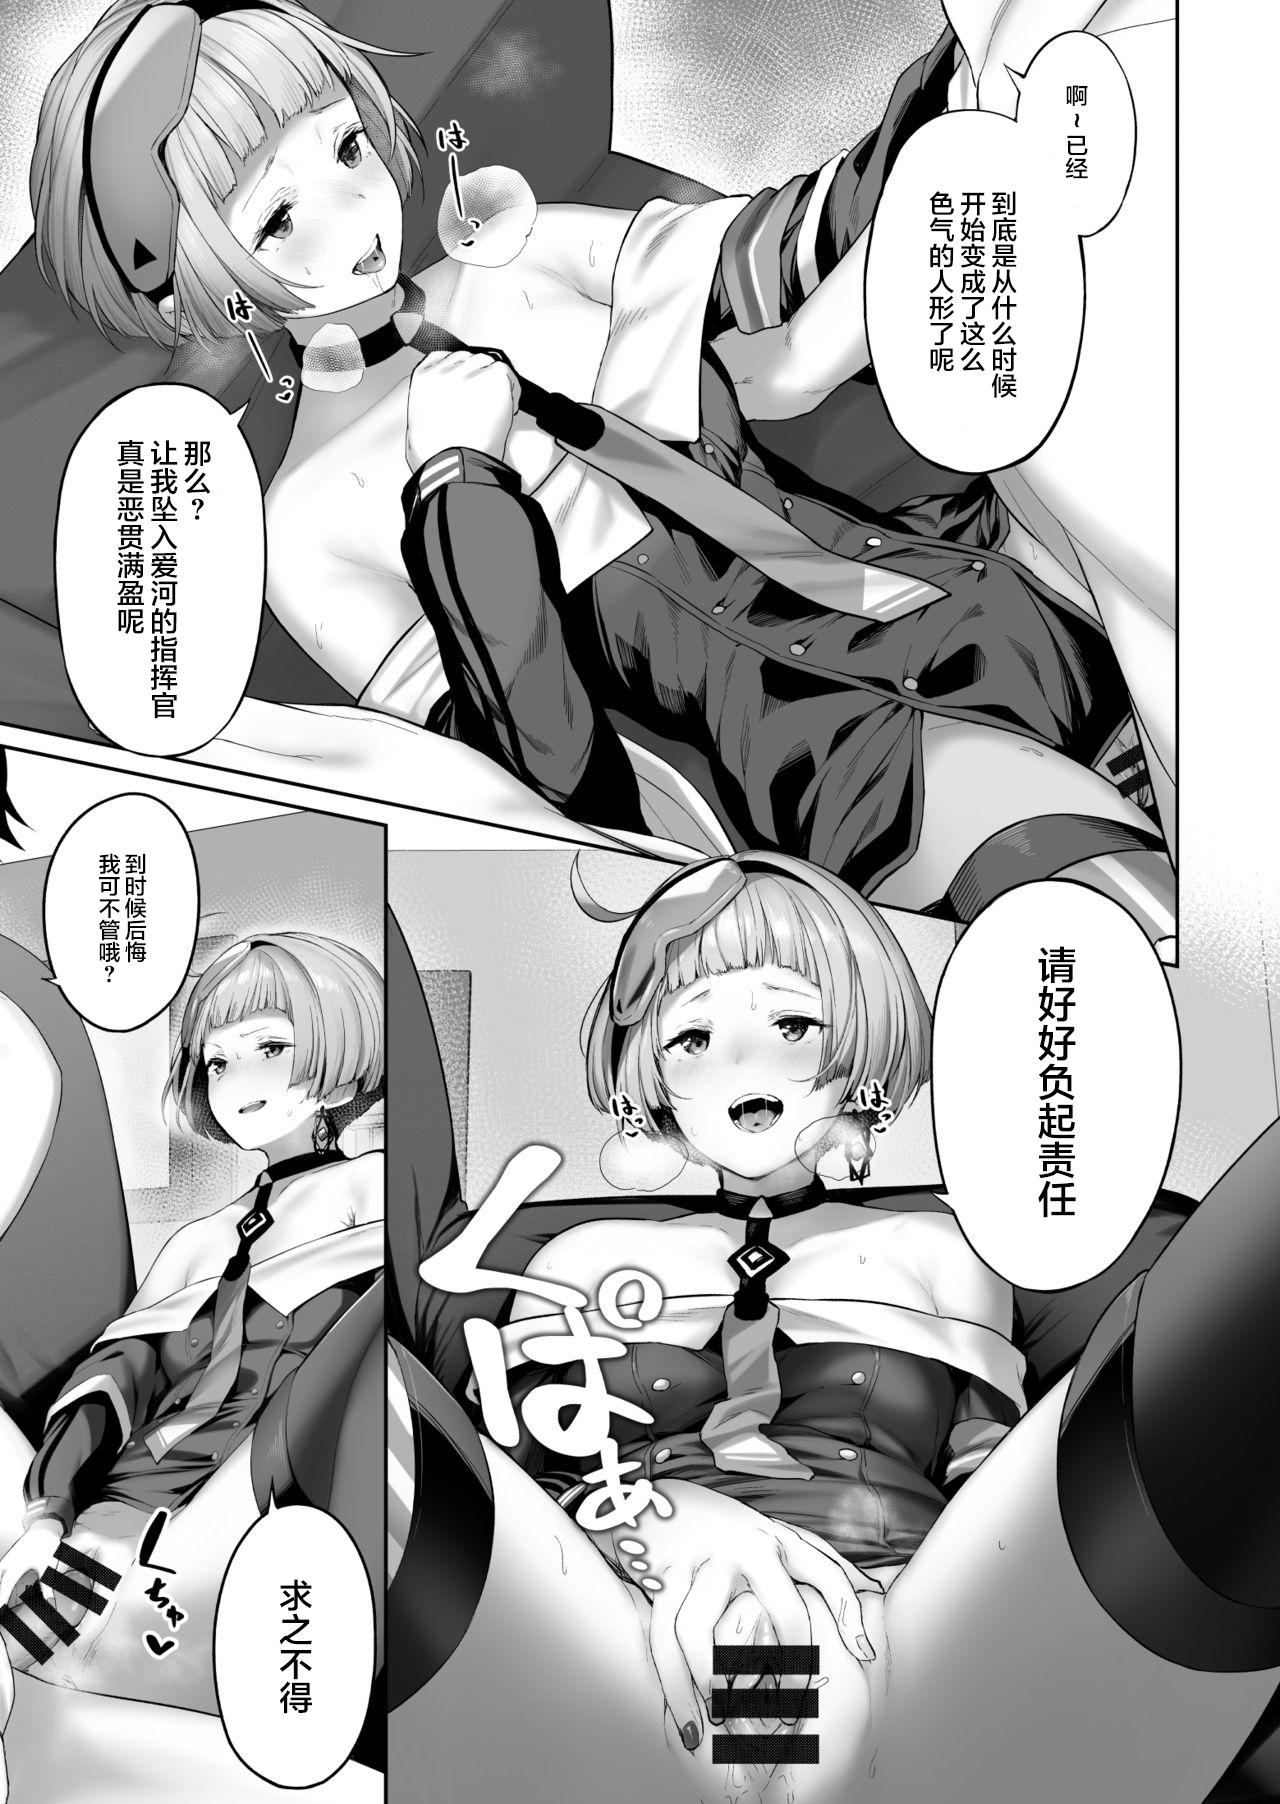 Gay 3some Zas M21 - Girls frontline Hentai - Page 9